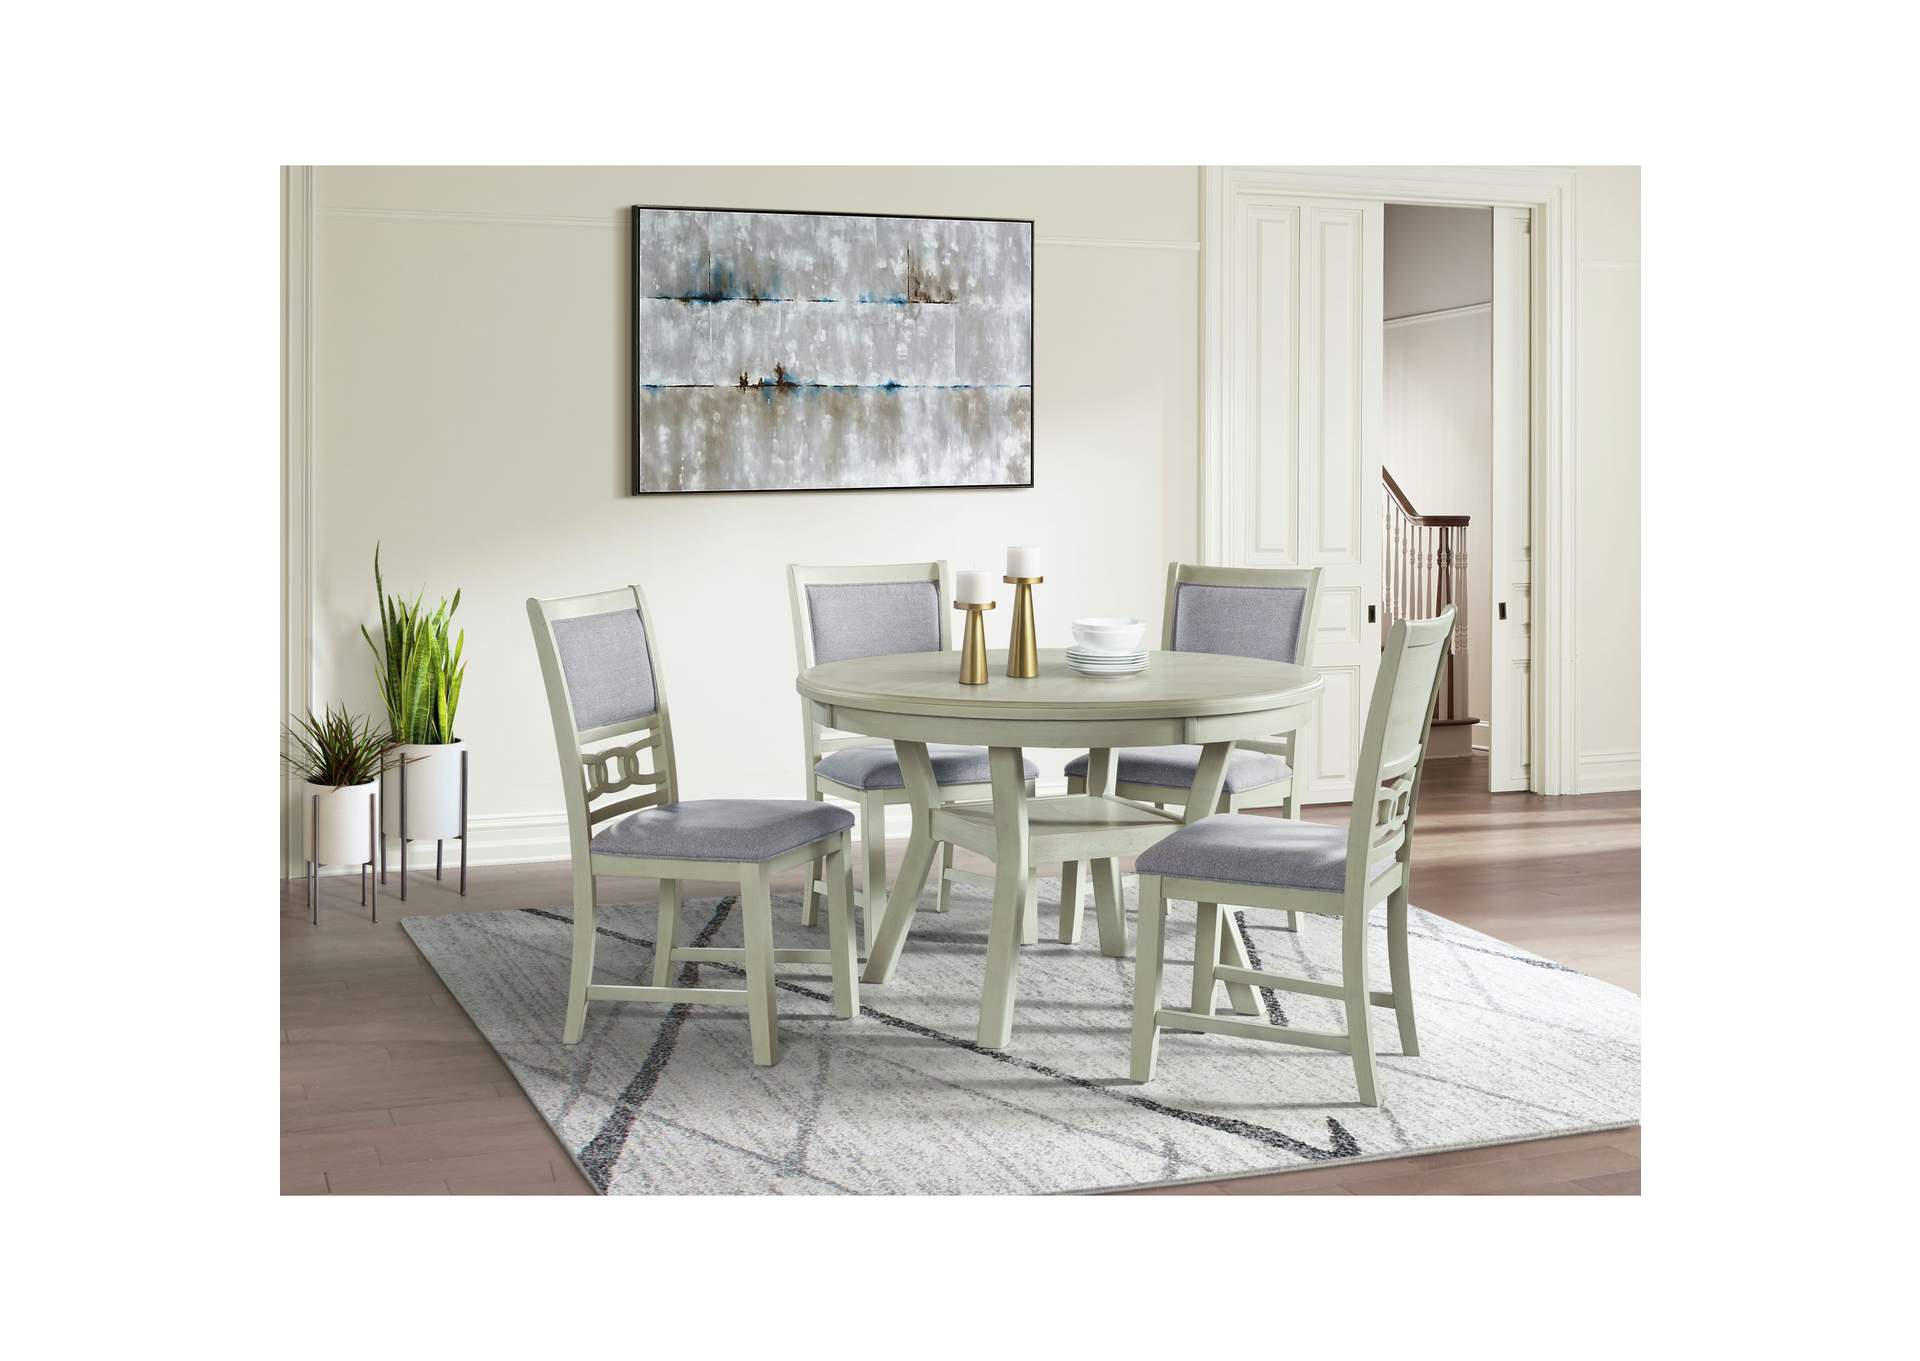 Amherst Dining Side Chair With Fabric Cushion Side Stretcher White Finish 2 Per Pack,Elements